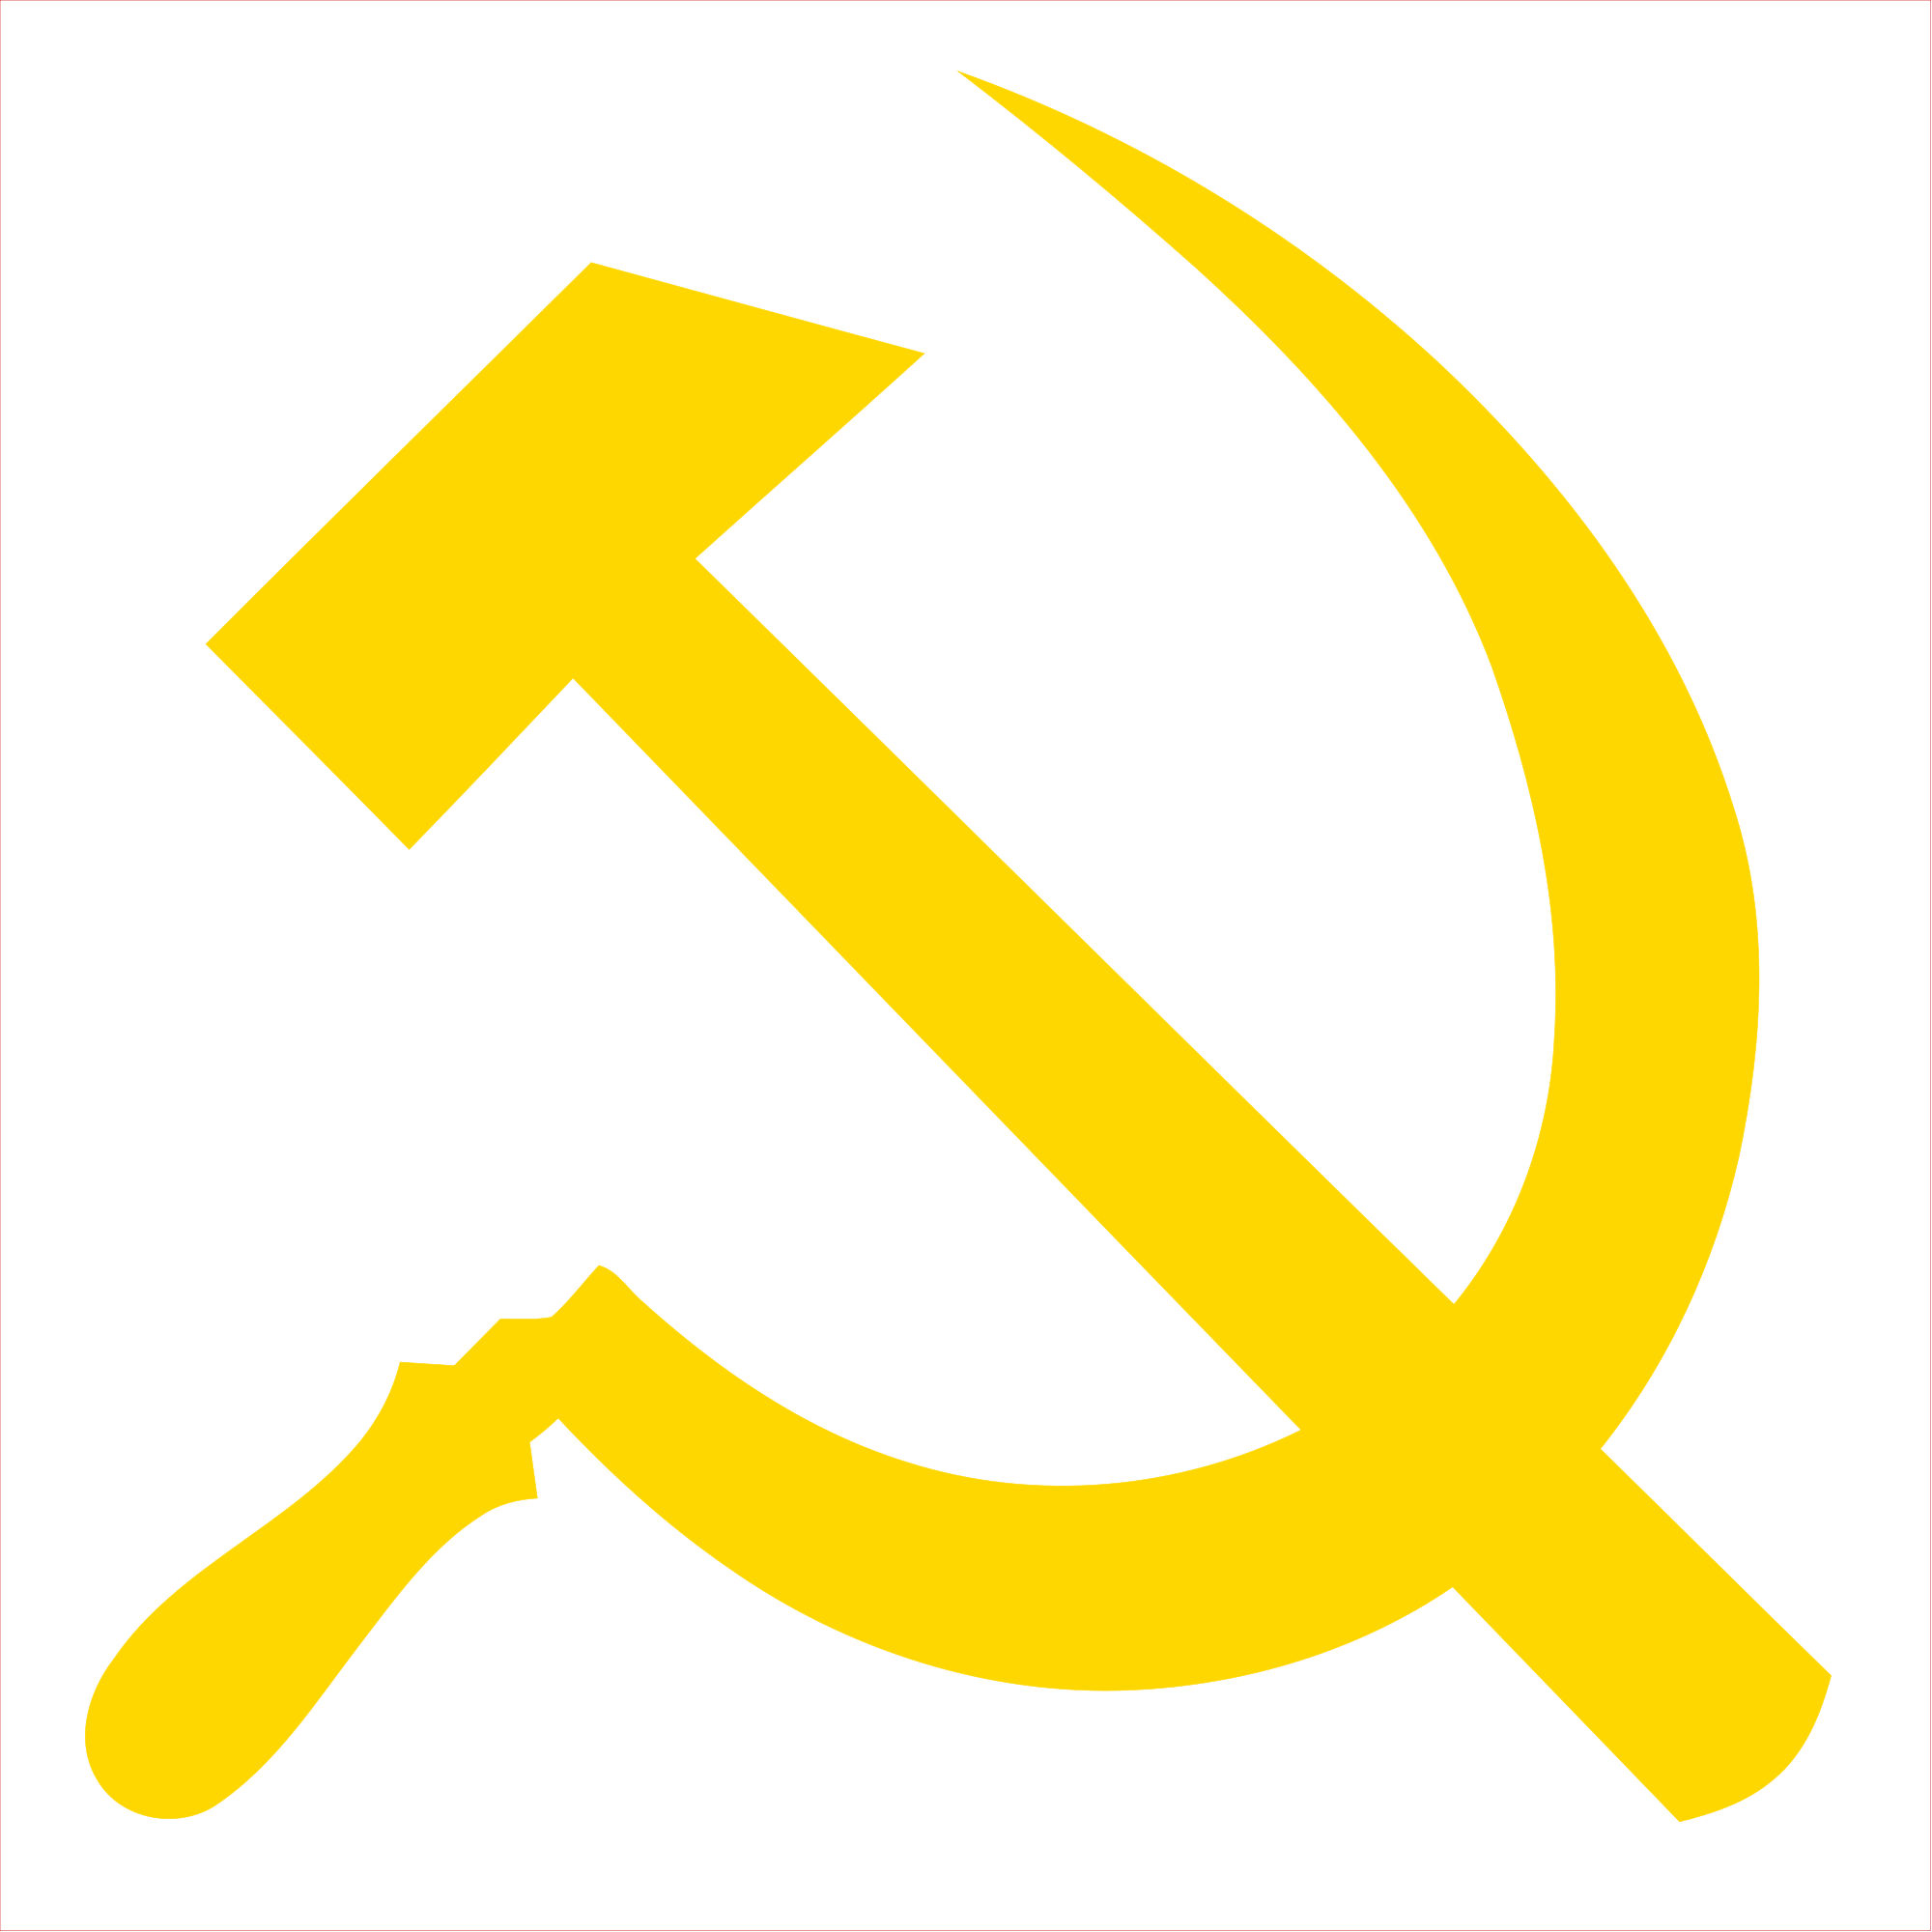 File:Logo of Communist Party of Belgium (1989).png - Wikipedia